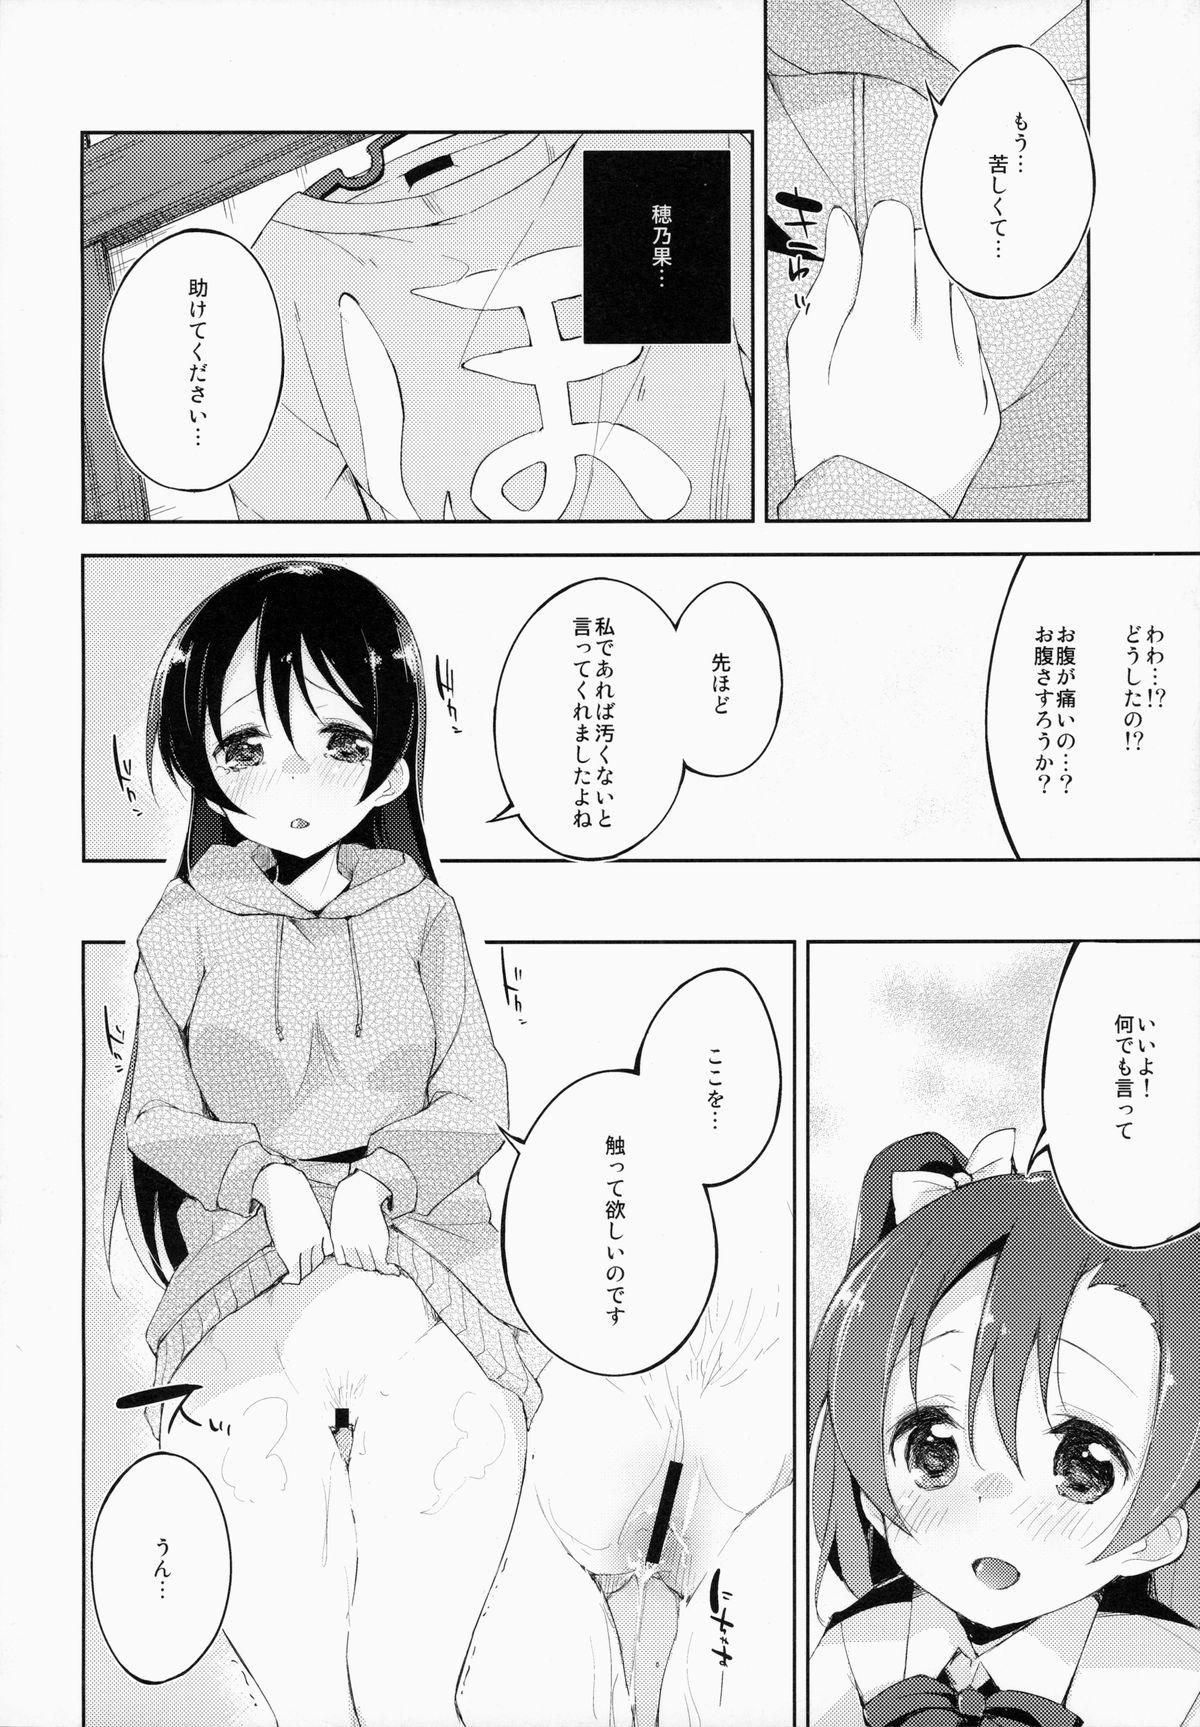 Gay CHERRY PiCKING DAYS. - Love live For - Page 11